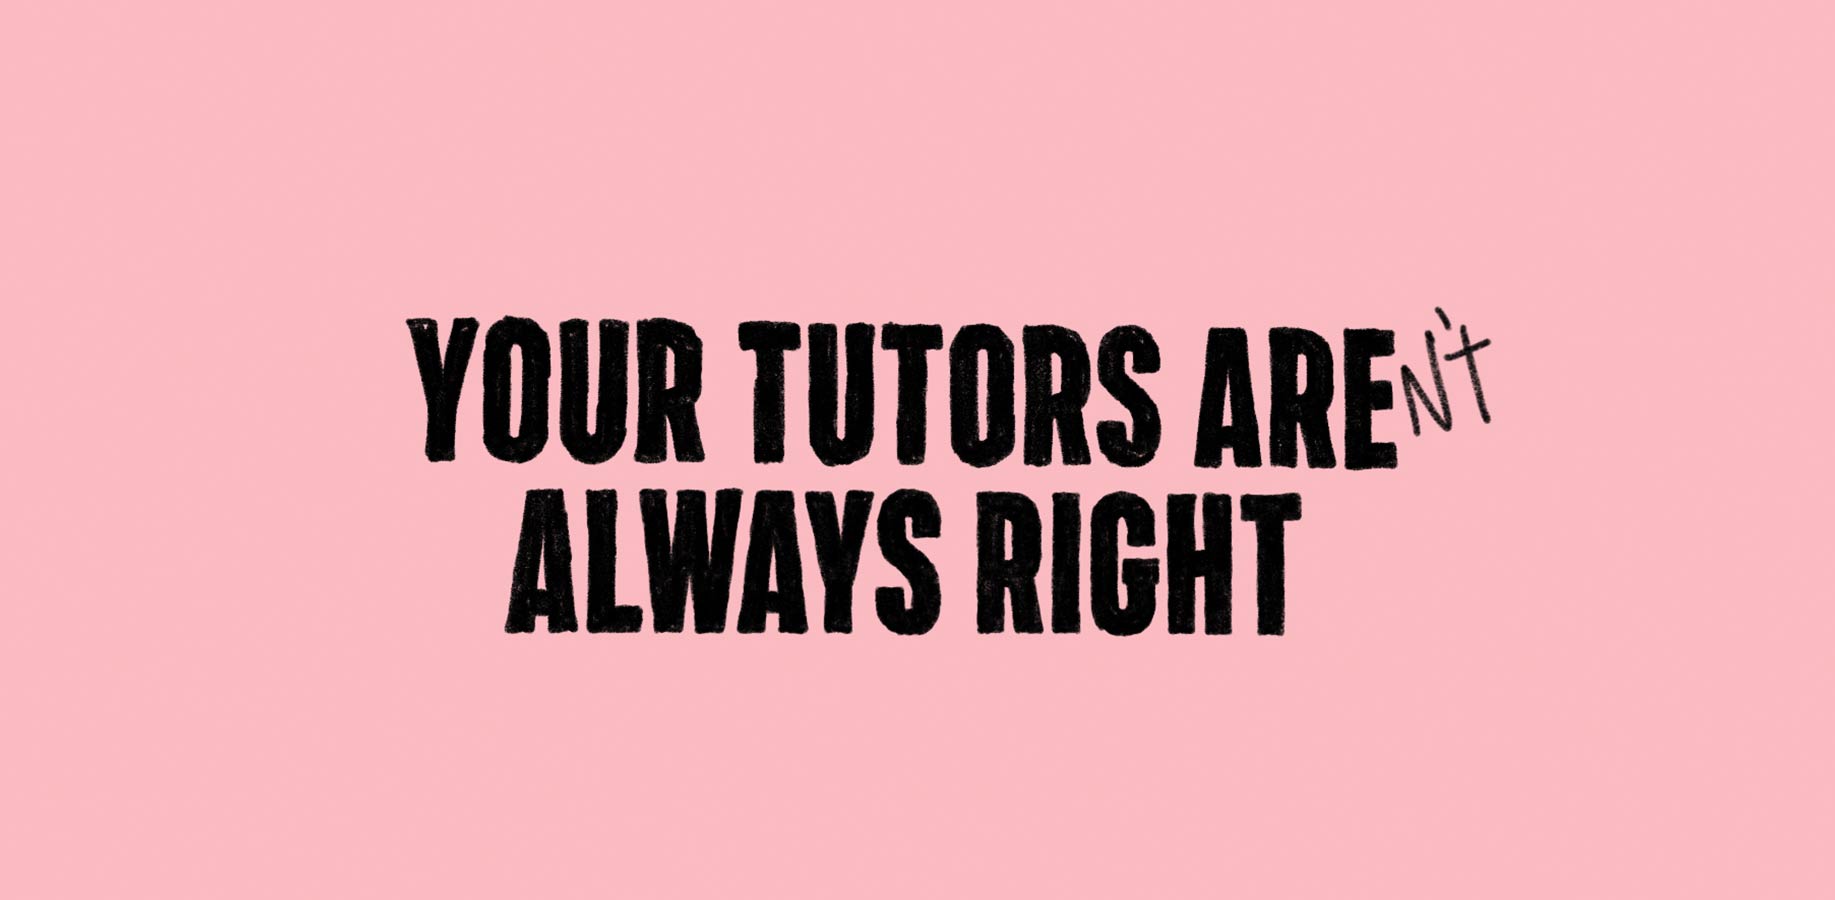 sidebyside_your_tutors_arent_always_right